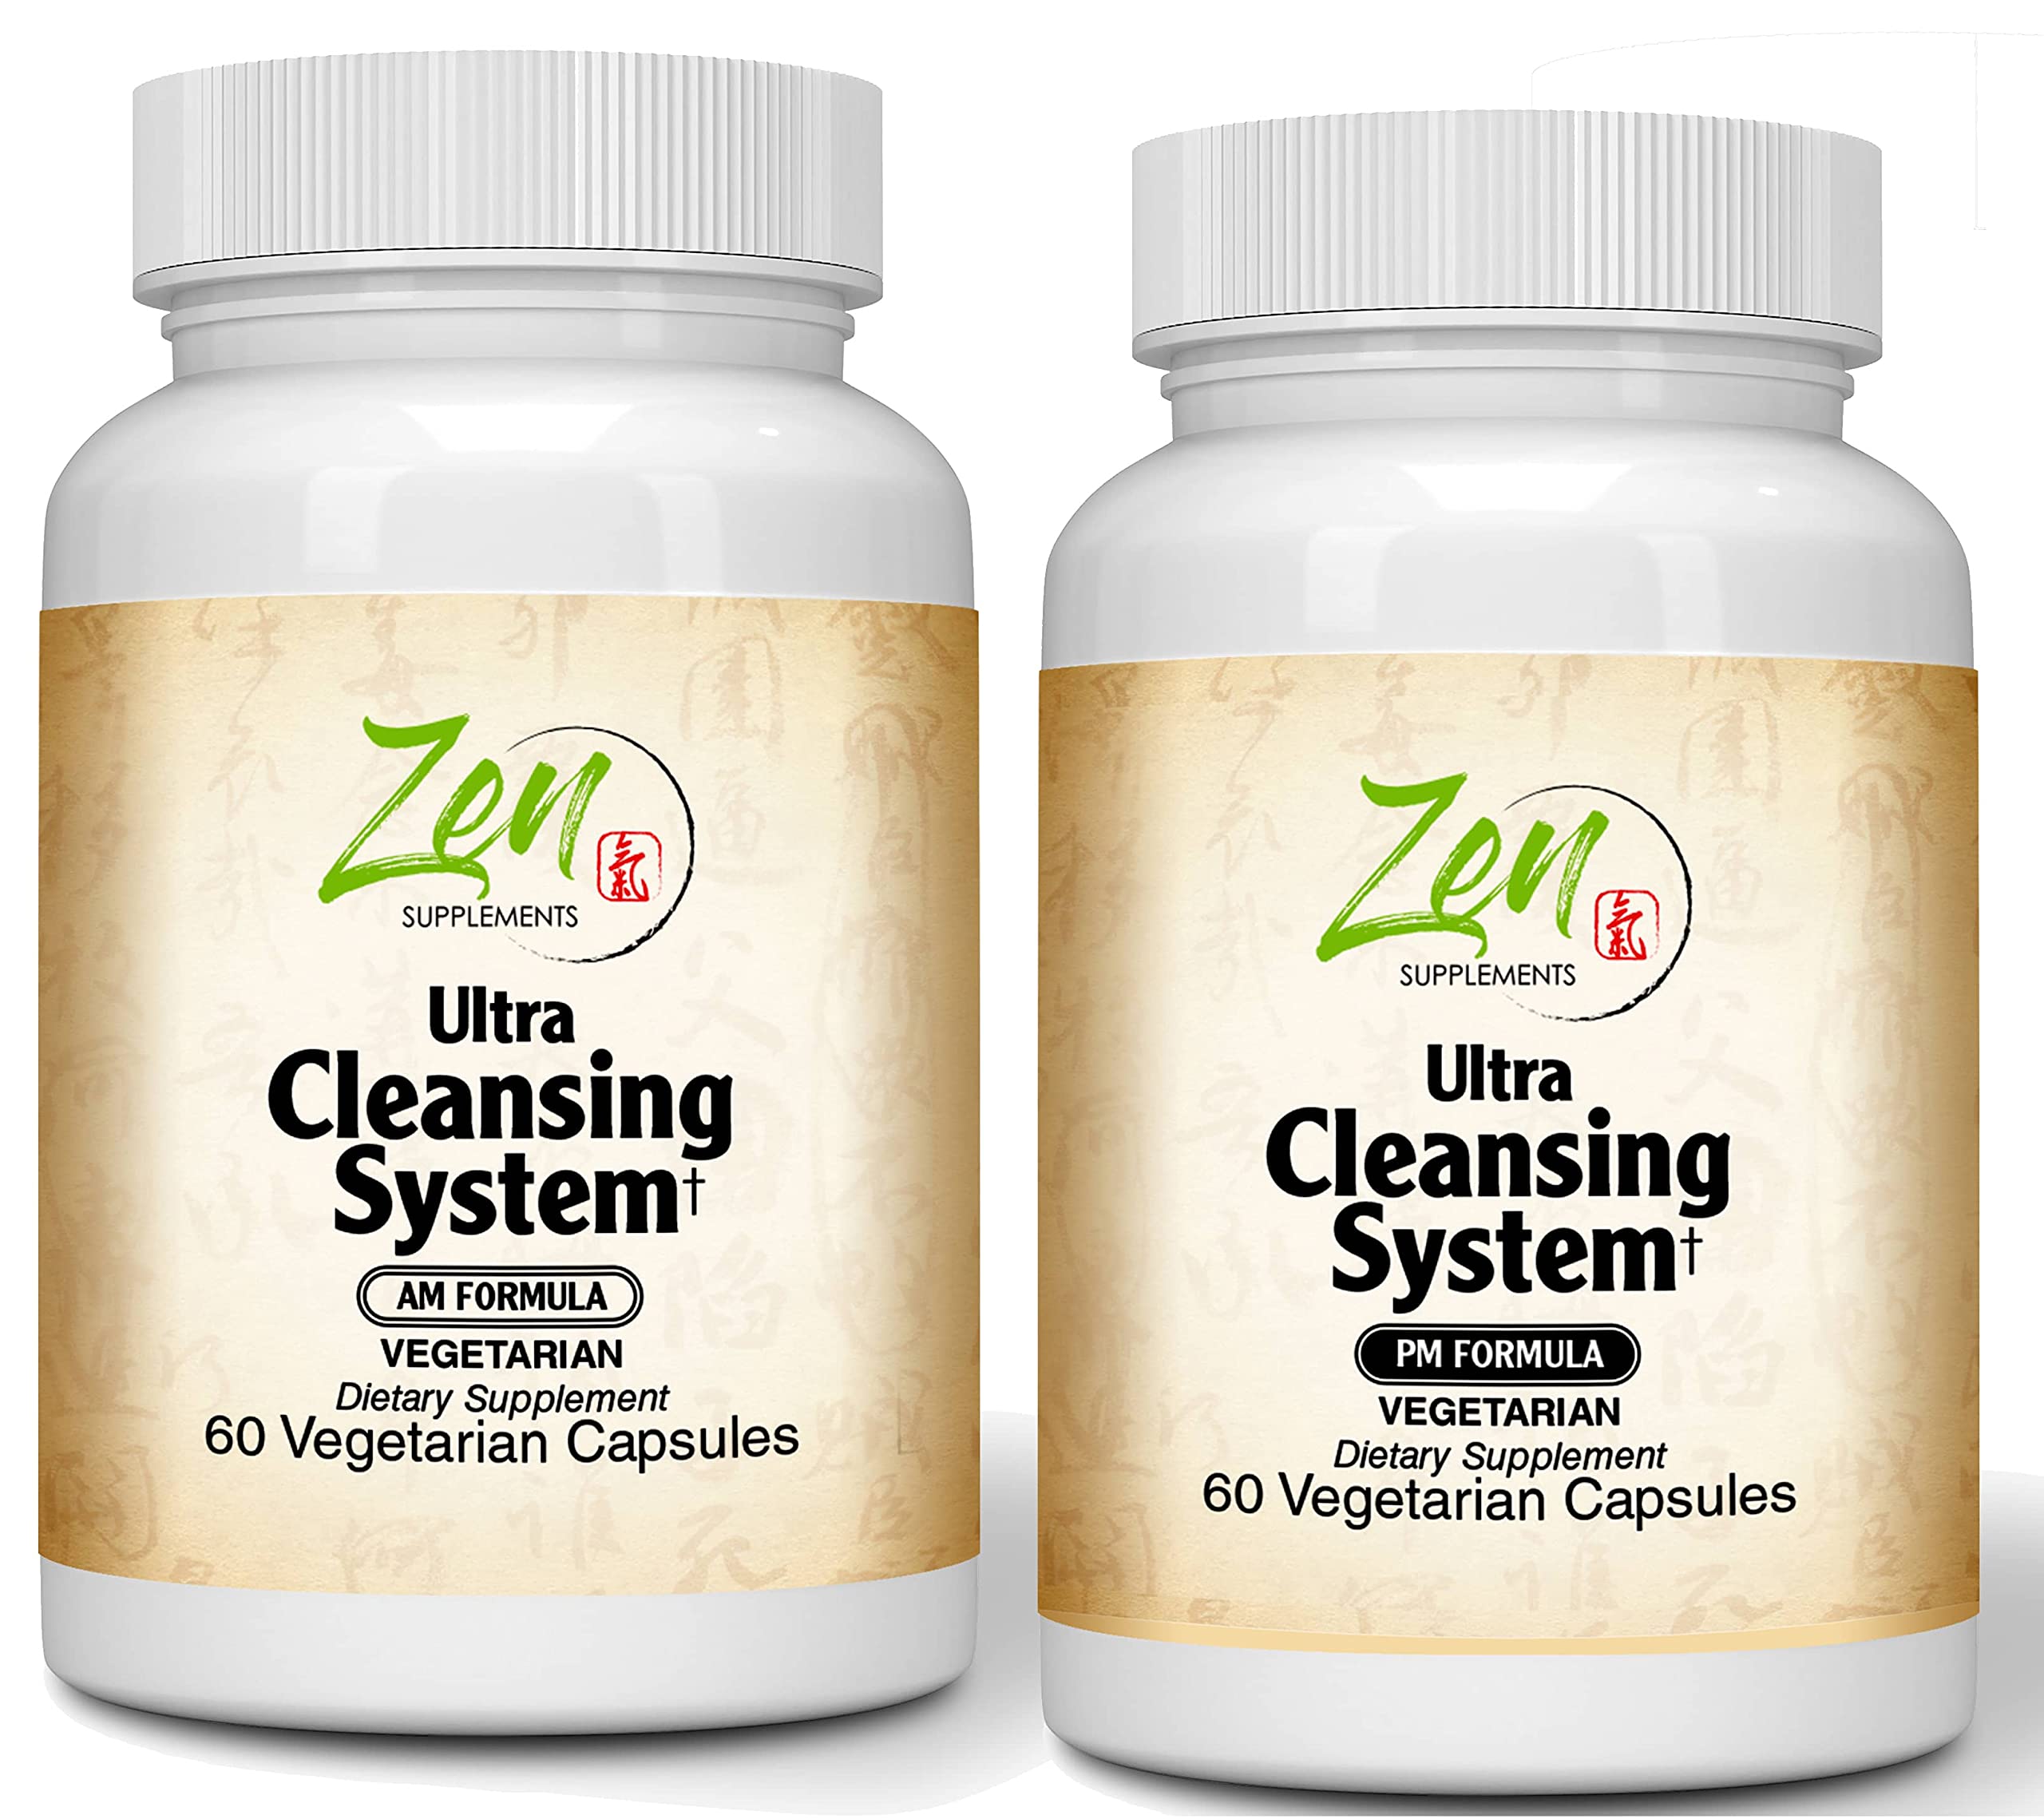 Zen Supplements - Ultra Cleansing System AM/PM Kit -100% Natural Herbal Blends Support for Maximum Whole Body Organs & Systems Detox Cleanse - Works Safely & Gently both Day & Night Over 30 Days - Vegetarian Formula 30 Day Kit